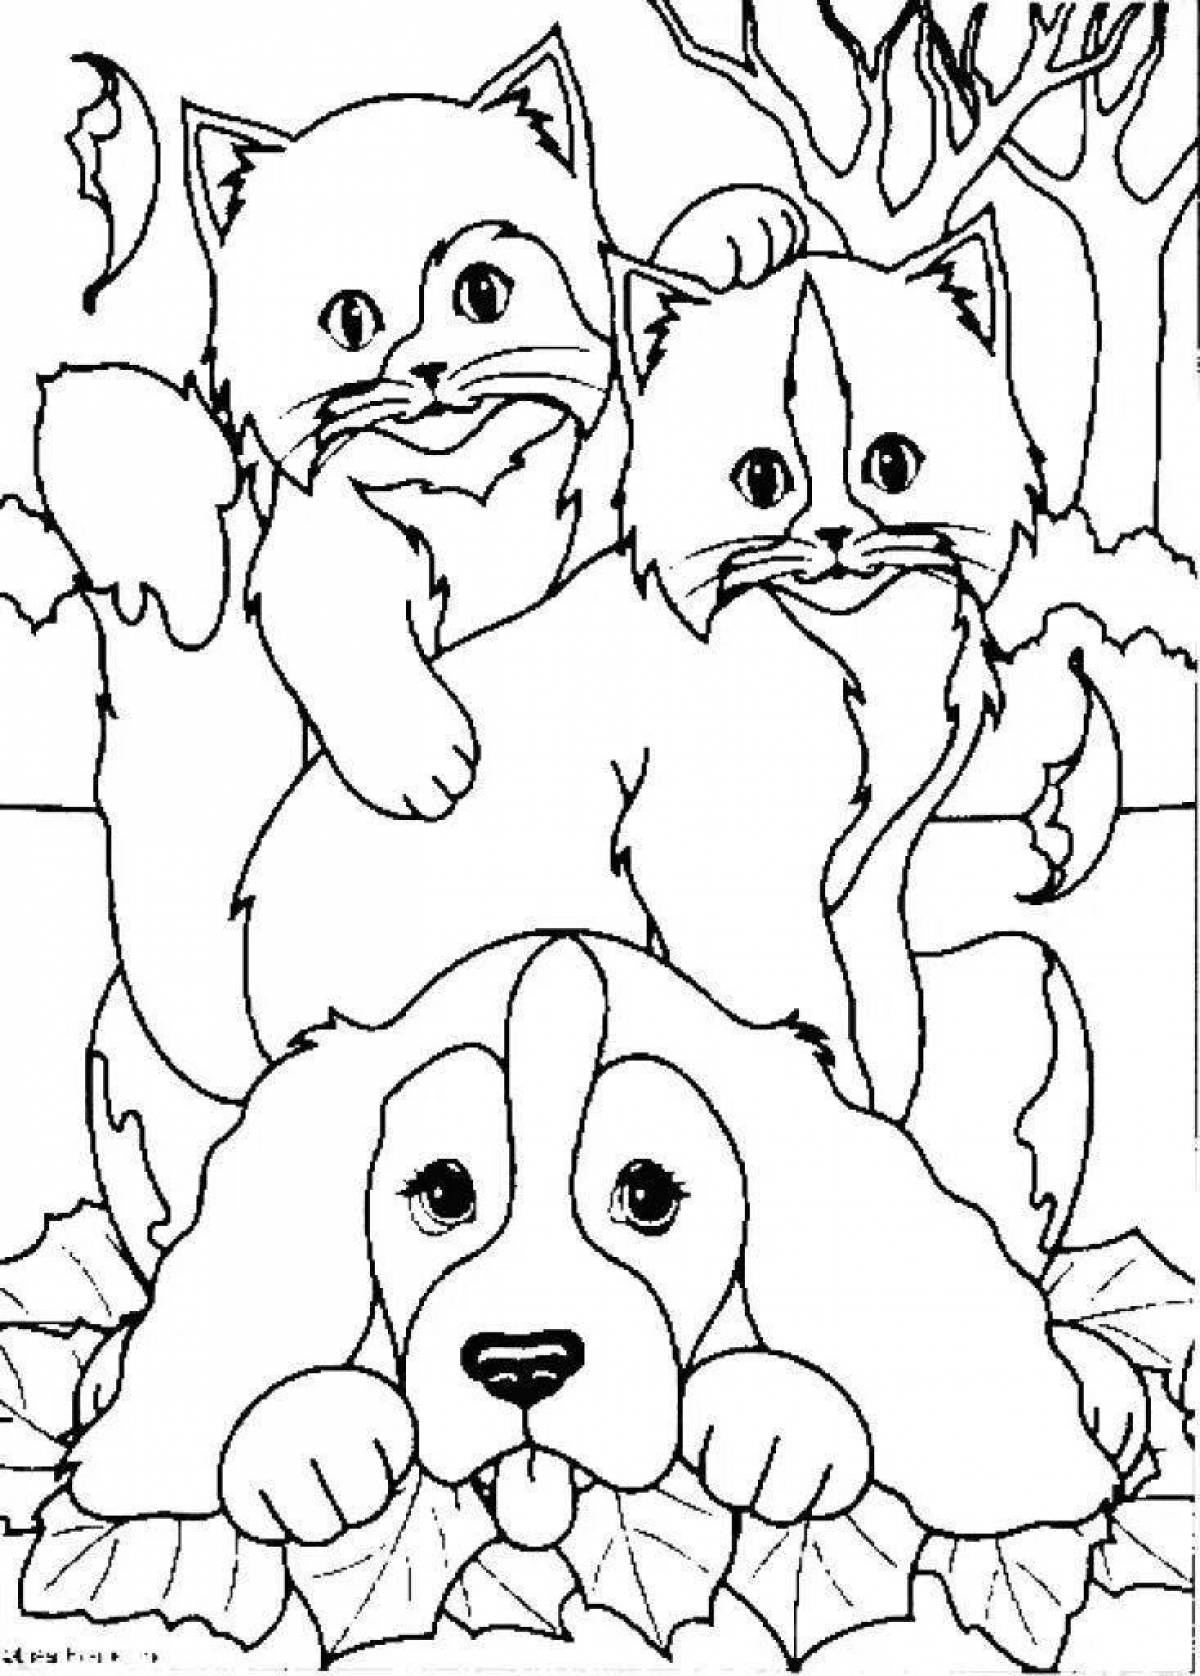 Great dog and cat coloring page